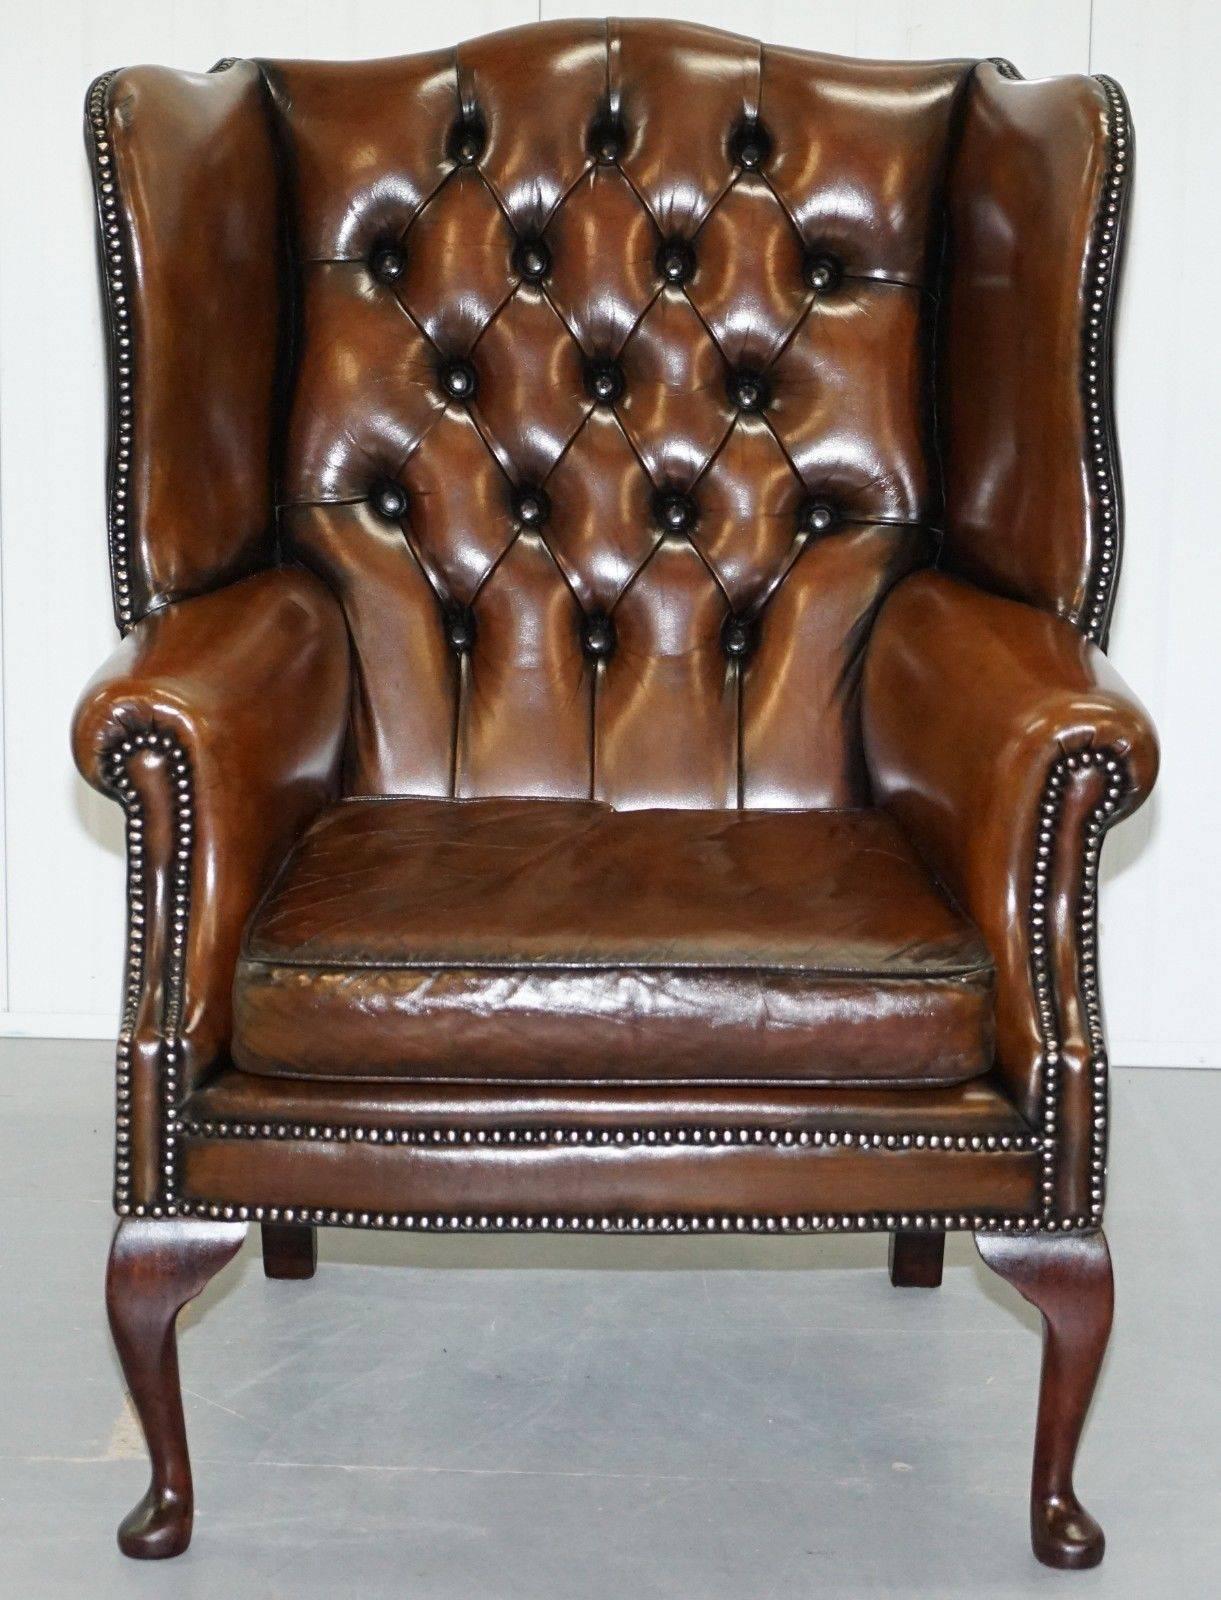 We are delighted to offer for sale this very nice pair of fully restored hand dyed cigar brown leather Chesterfield wingback armchairs with matching footstool 

A very nice pair in excellent hand dyed order throughout, the leather patina is